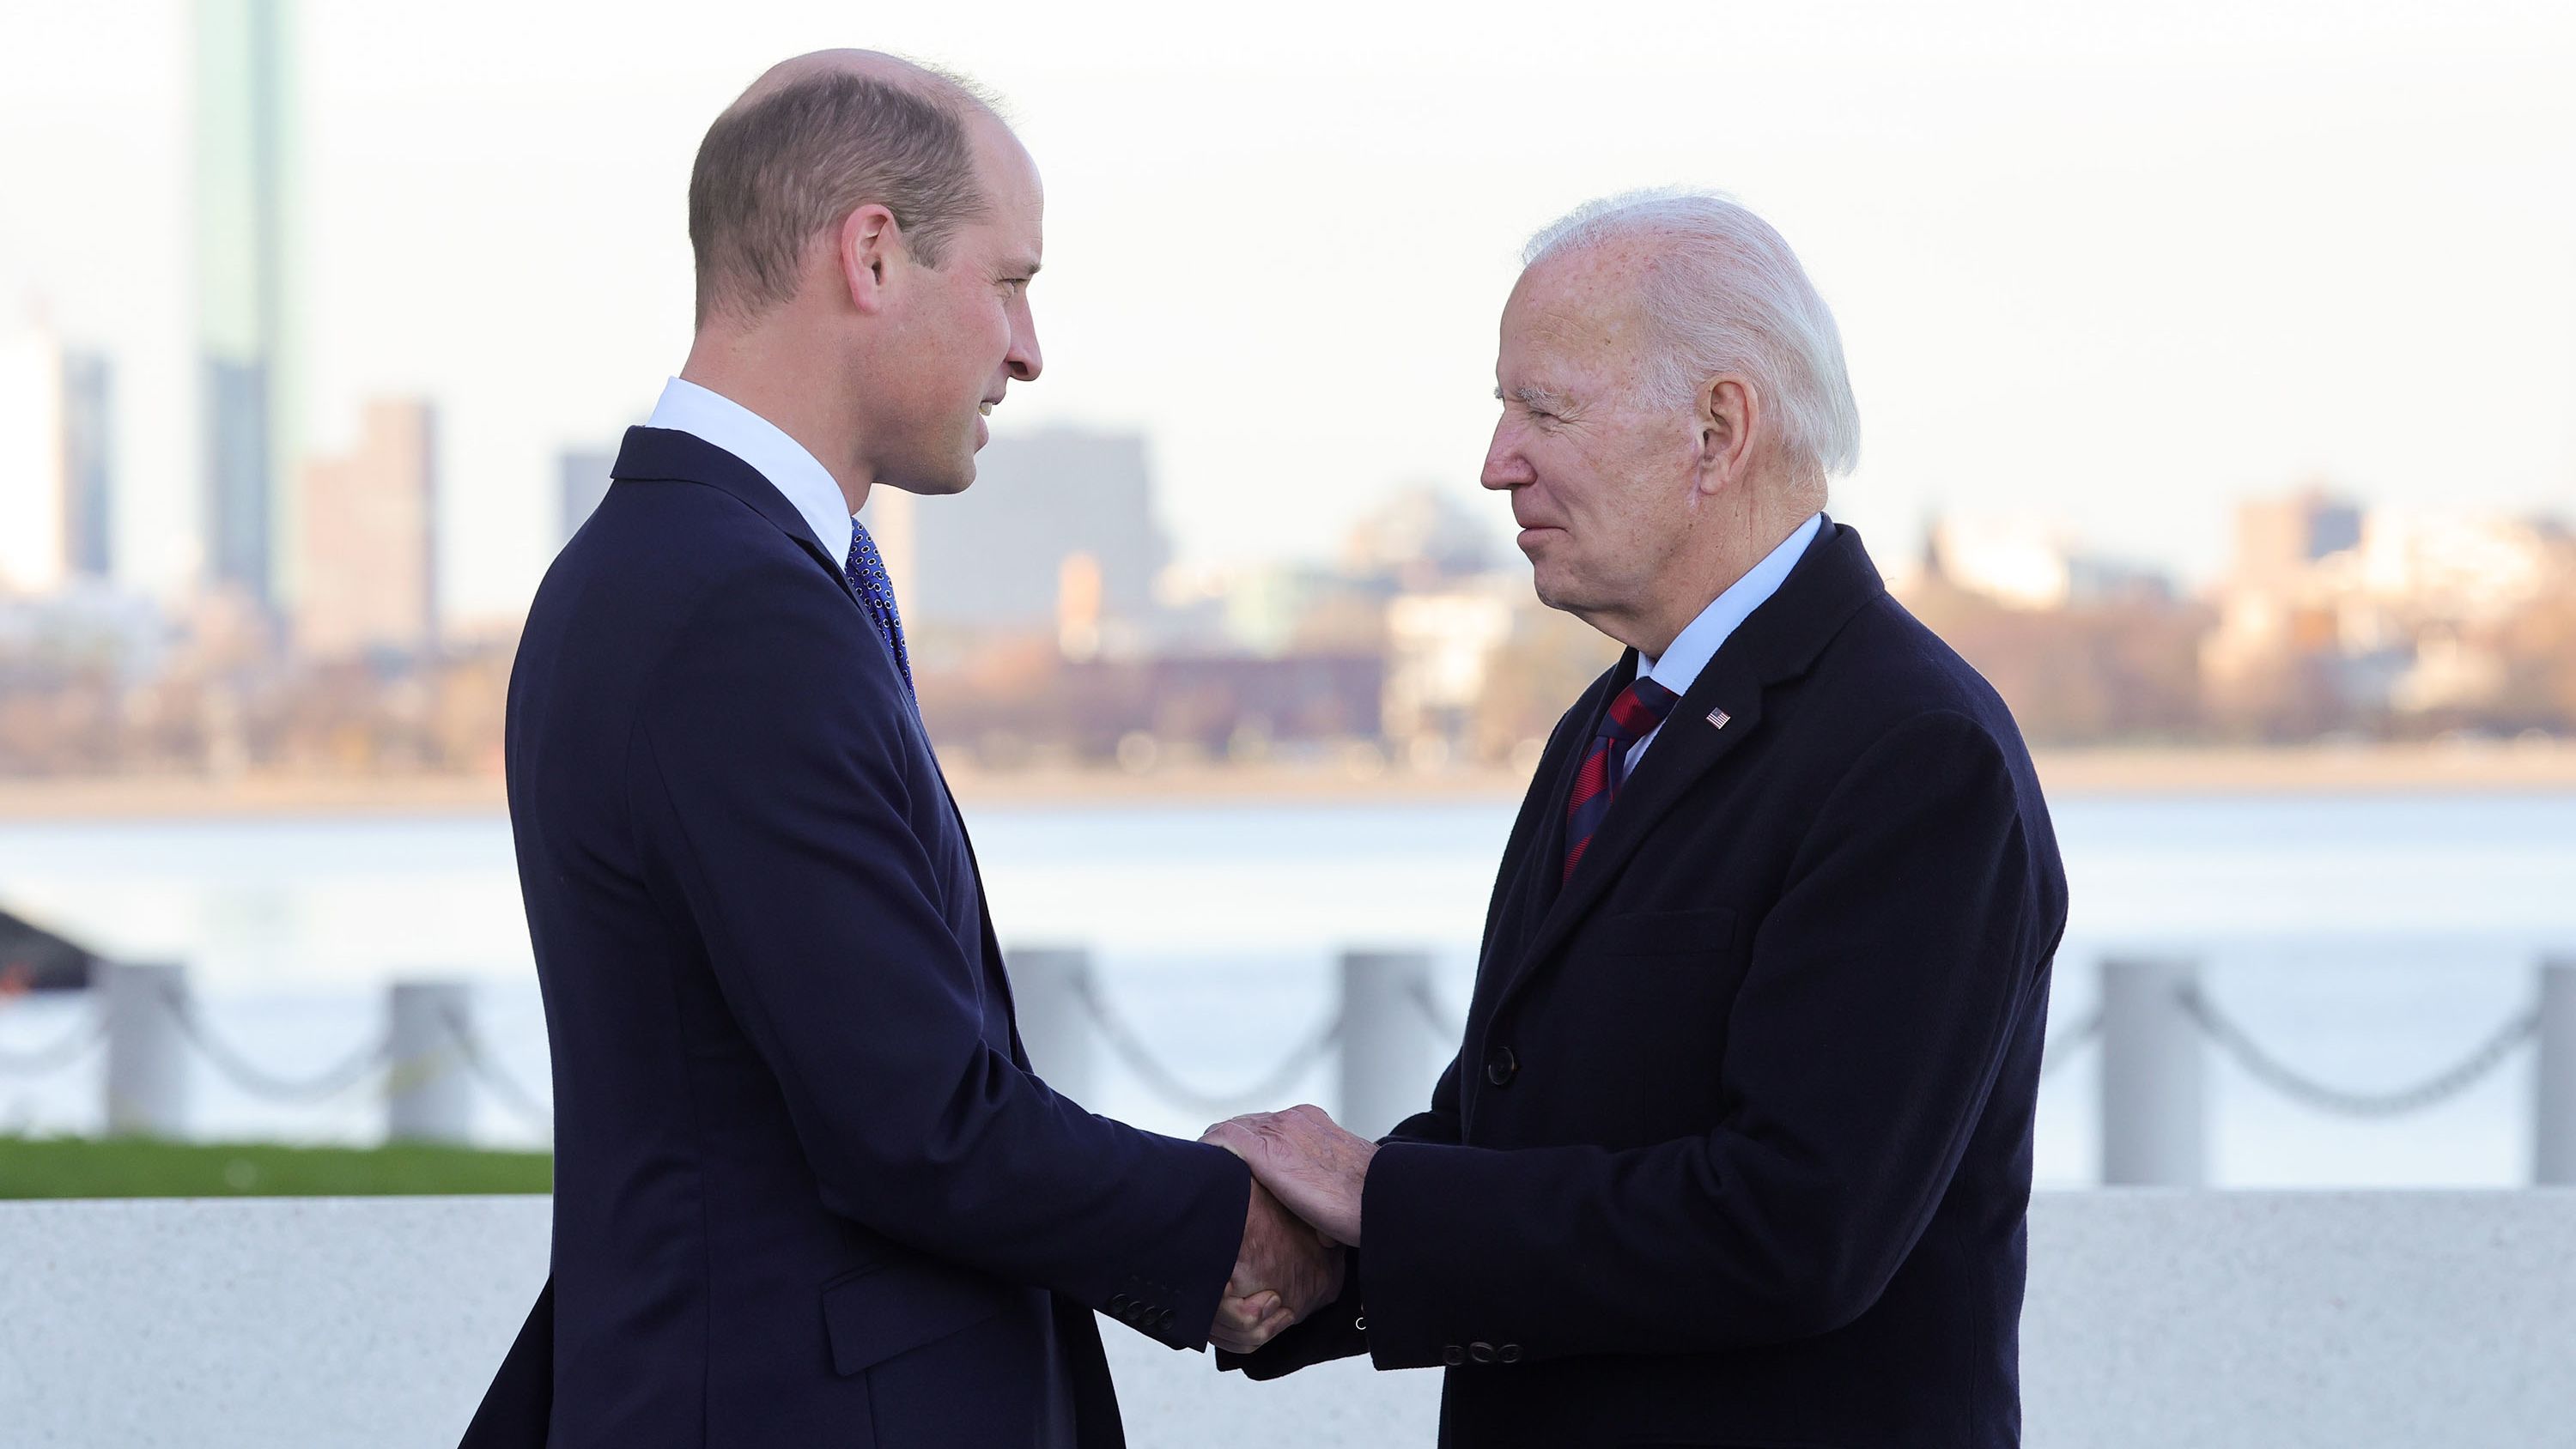 Prince William shakes hands with US President Joe Biden during a <a href="https://www.cnn.com/2022/12/01/world/gallery/royals-boston-visit-william-kate/index.html" target="_blank">visit to Boston</a> in December 2022. The two men shared "warm memories" of the Queen, according to Kensington Palace. William and Catherine were in Boston to attend the Earthshot Prize Awards that William founded two years prior.